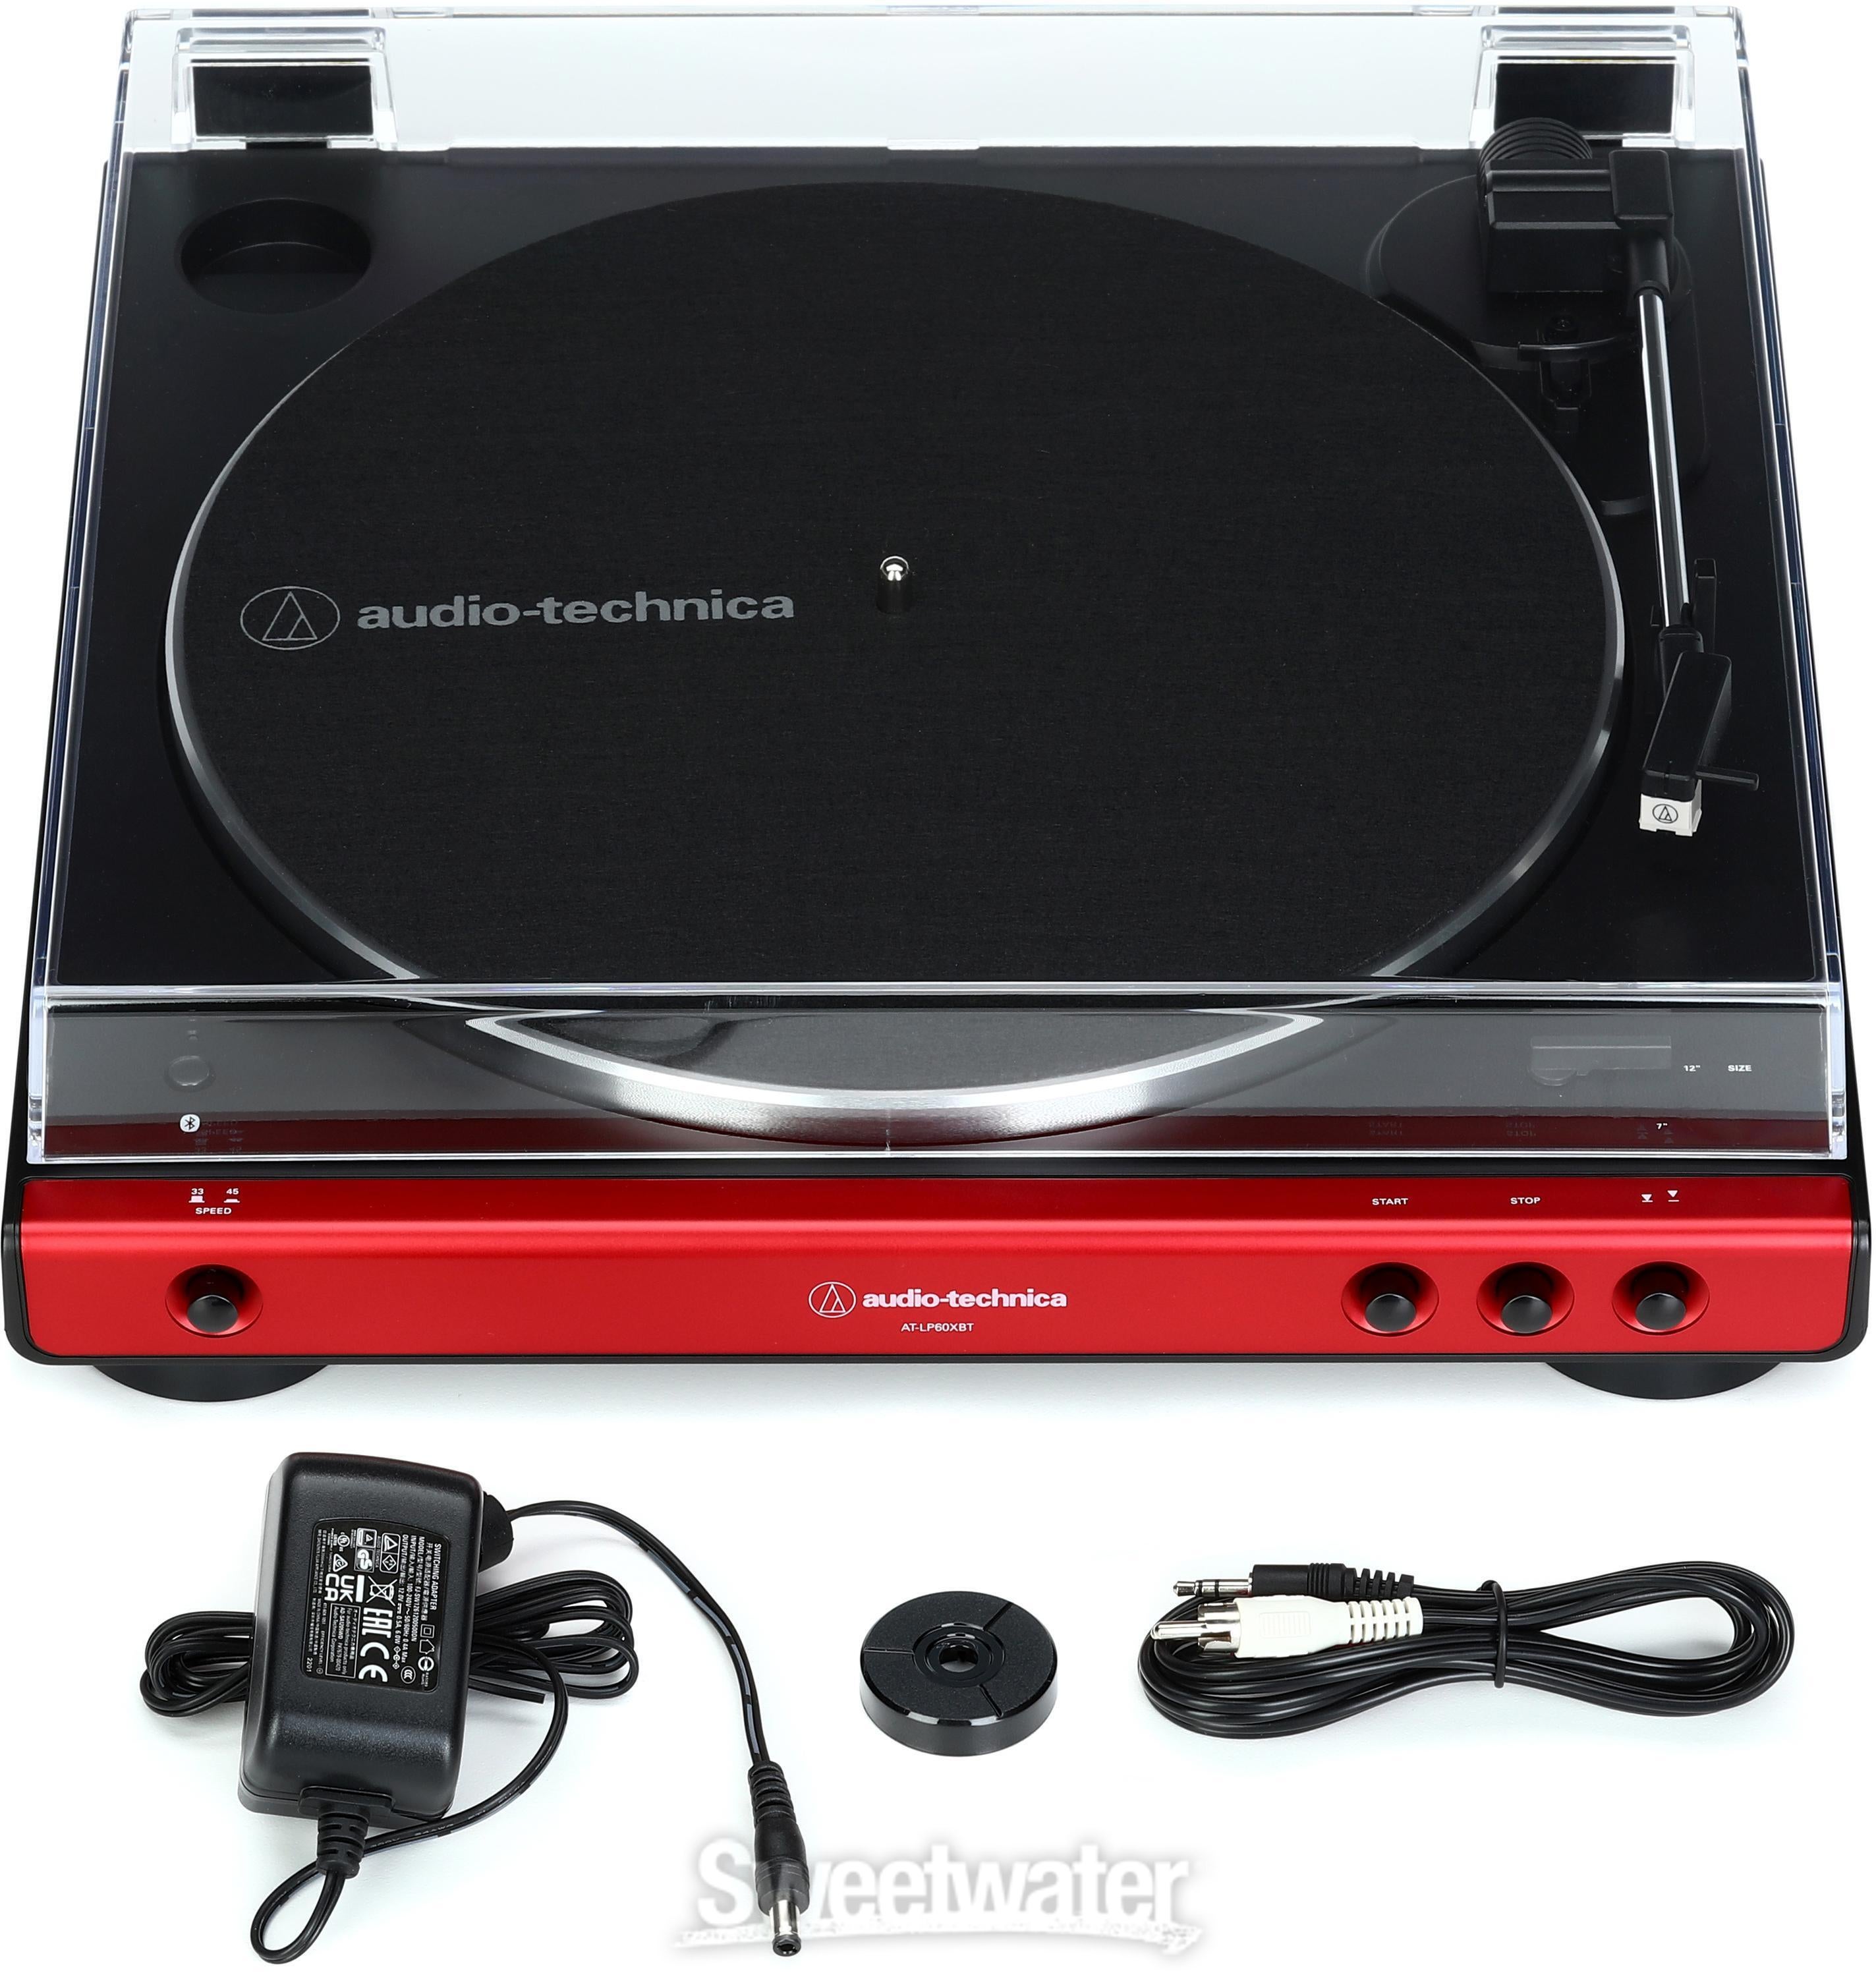 Audio-Technica AT-LP60XBT Wireless Belt-Drive Turntable with 